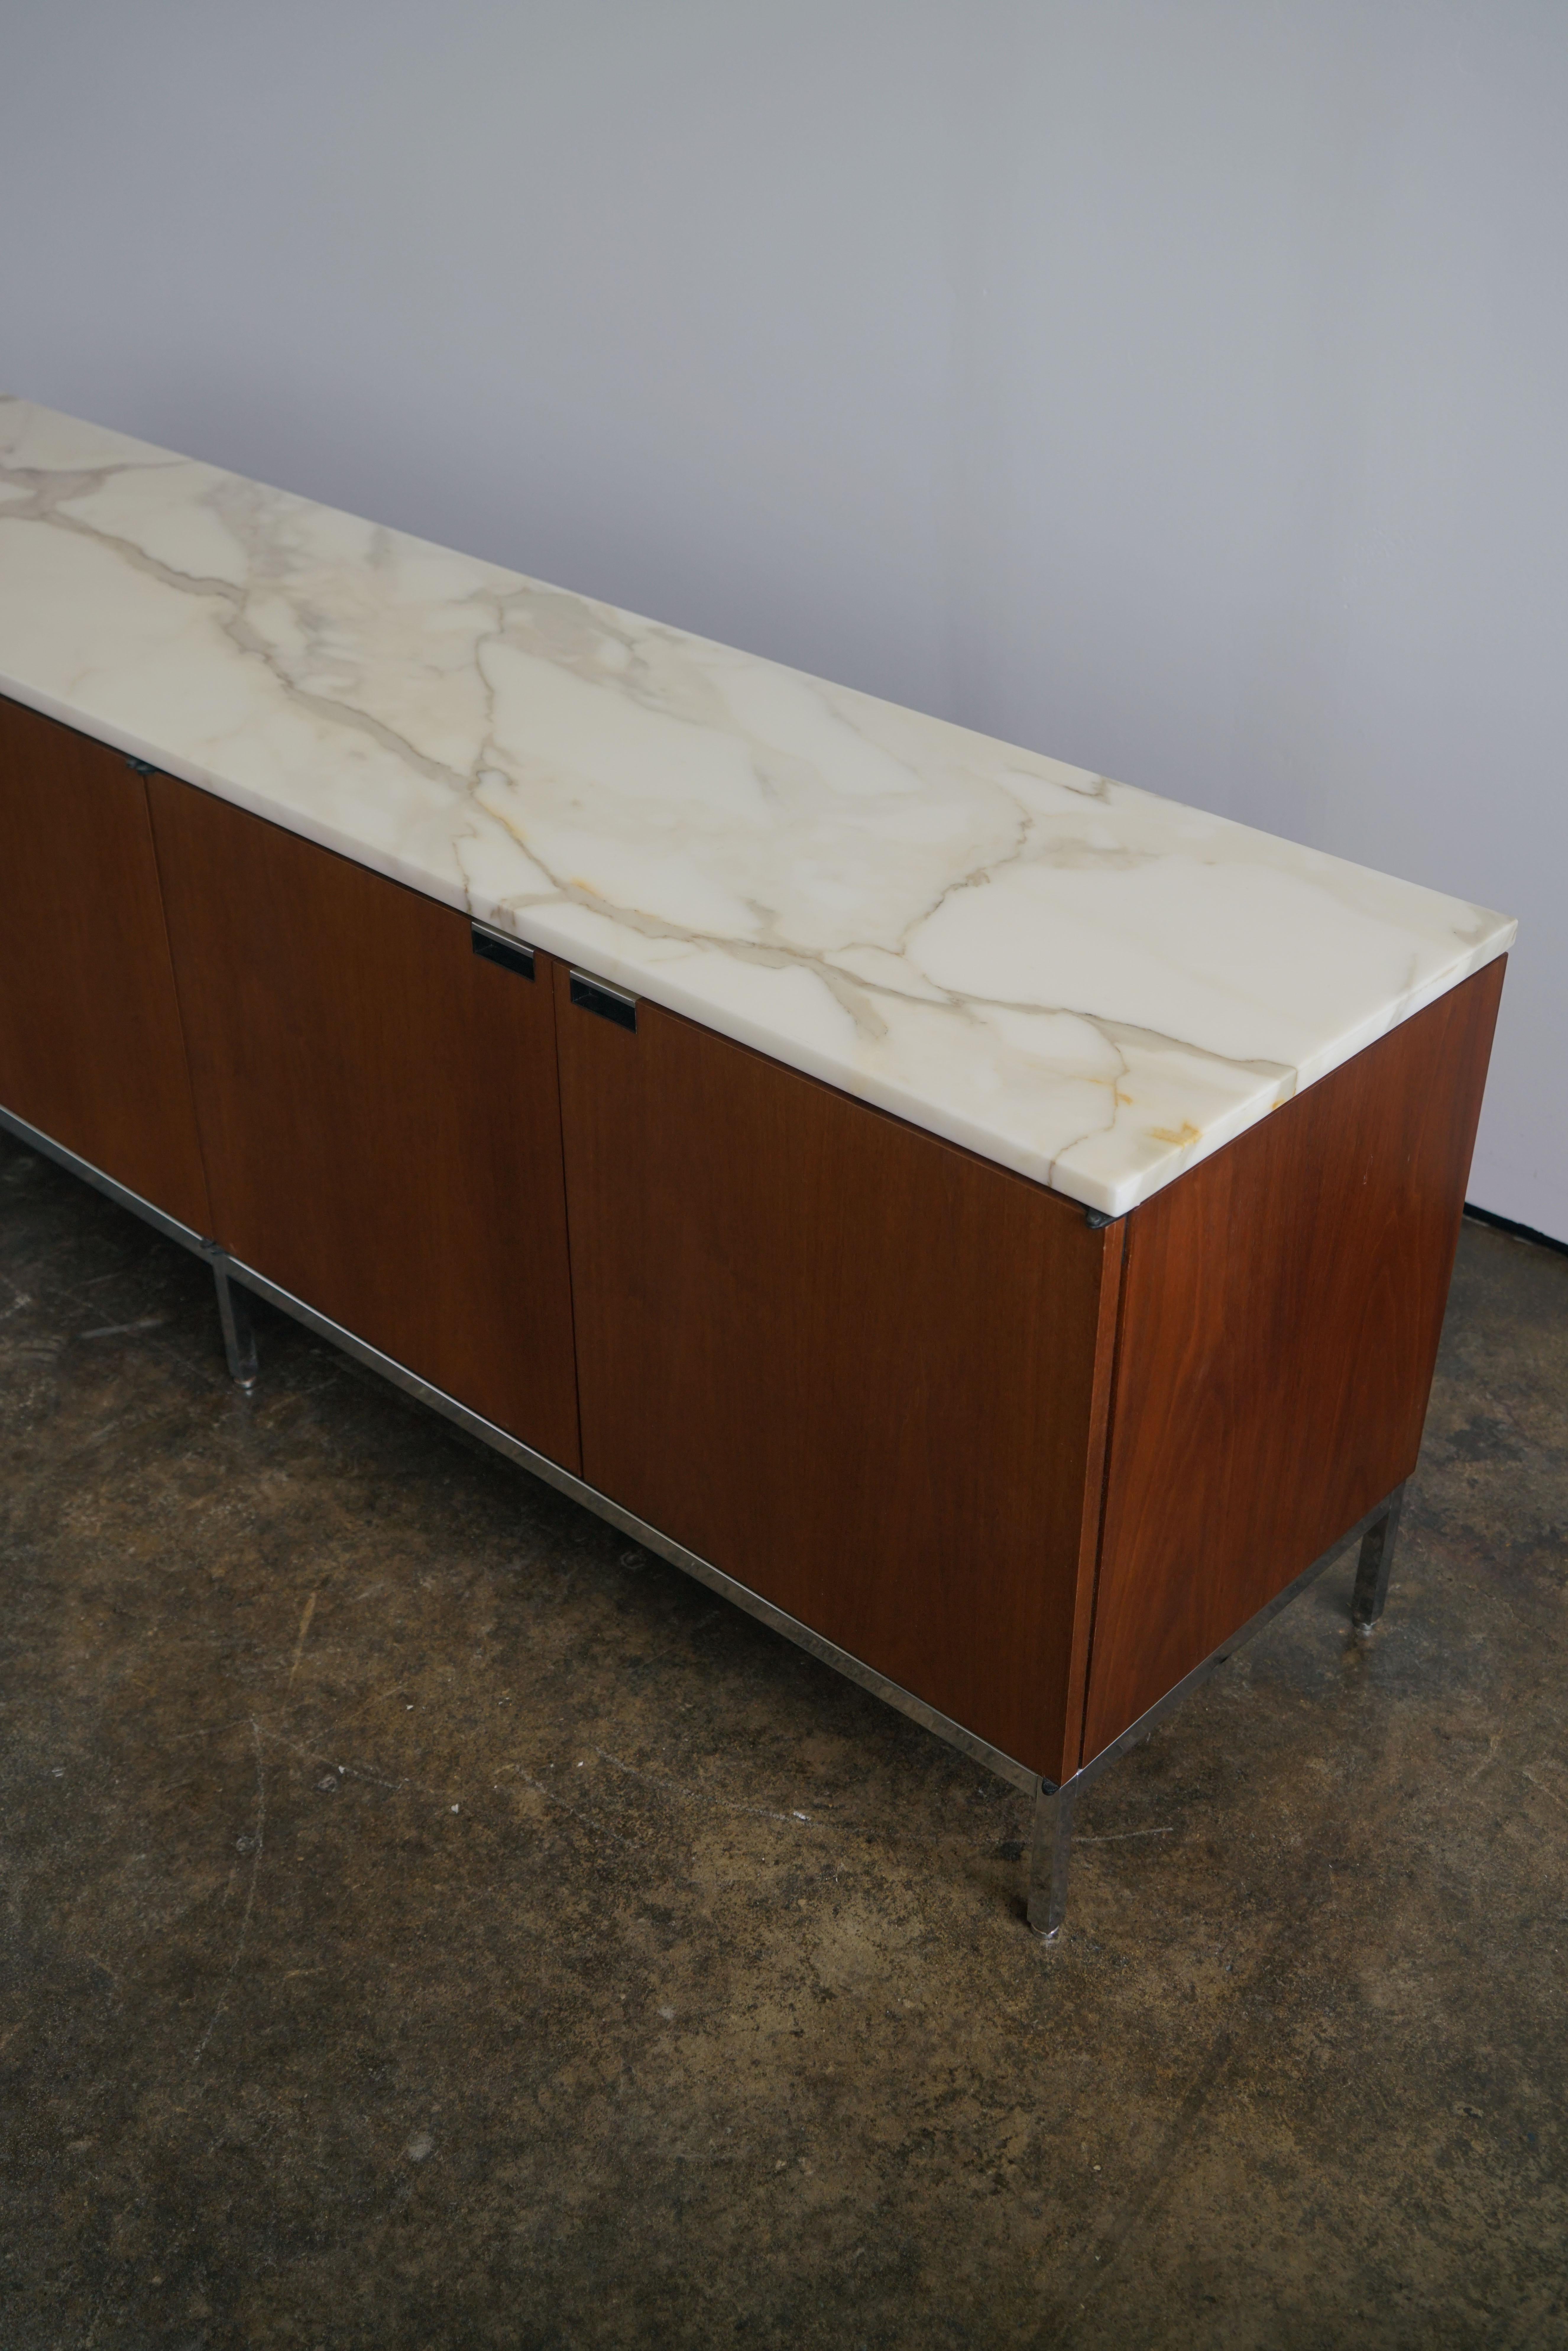 75” x 18.25” x 25.5”H

Medium Brown Mahogany, Carrara marble top, chrome-plated steel legs

8 adjustable shelves

Knoll label

Condition: Very good to excellent. Slight yellowing on marble top over time, but does not detract from the overall